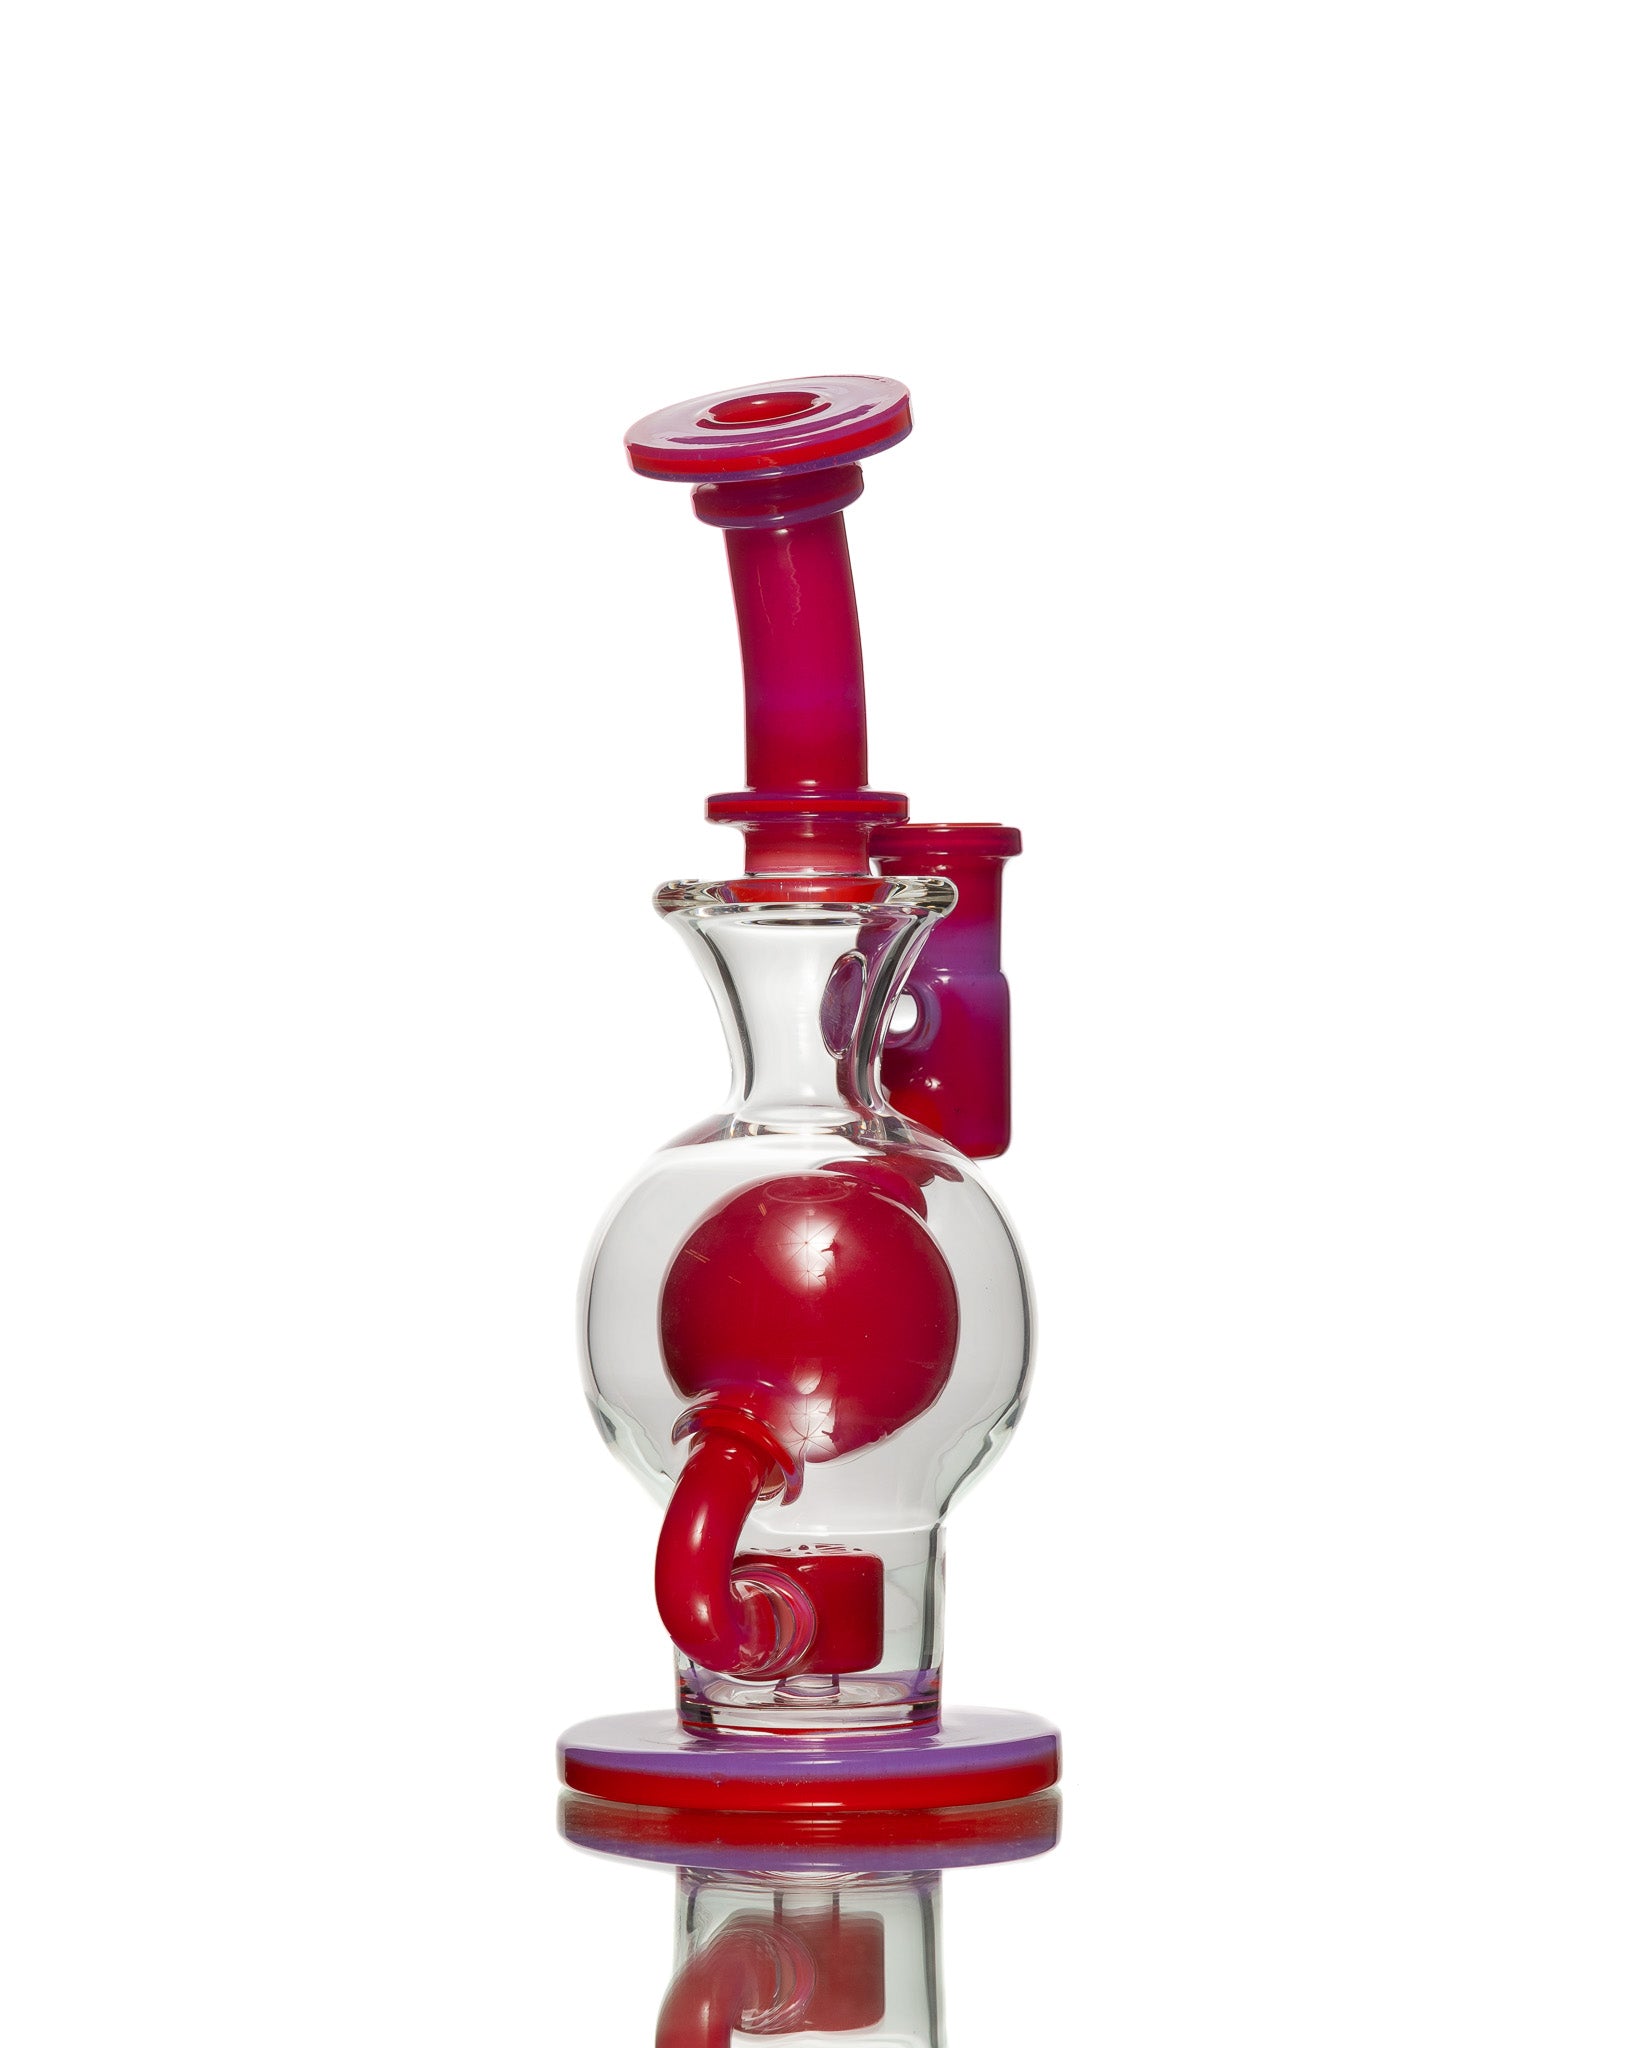 FatBoy Glass - "Pink Slime over Poppy" Ball Bubbler